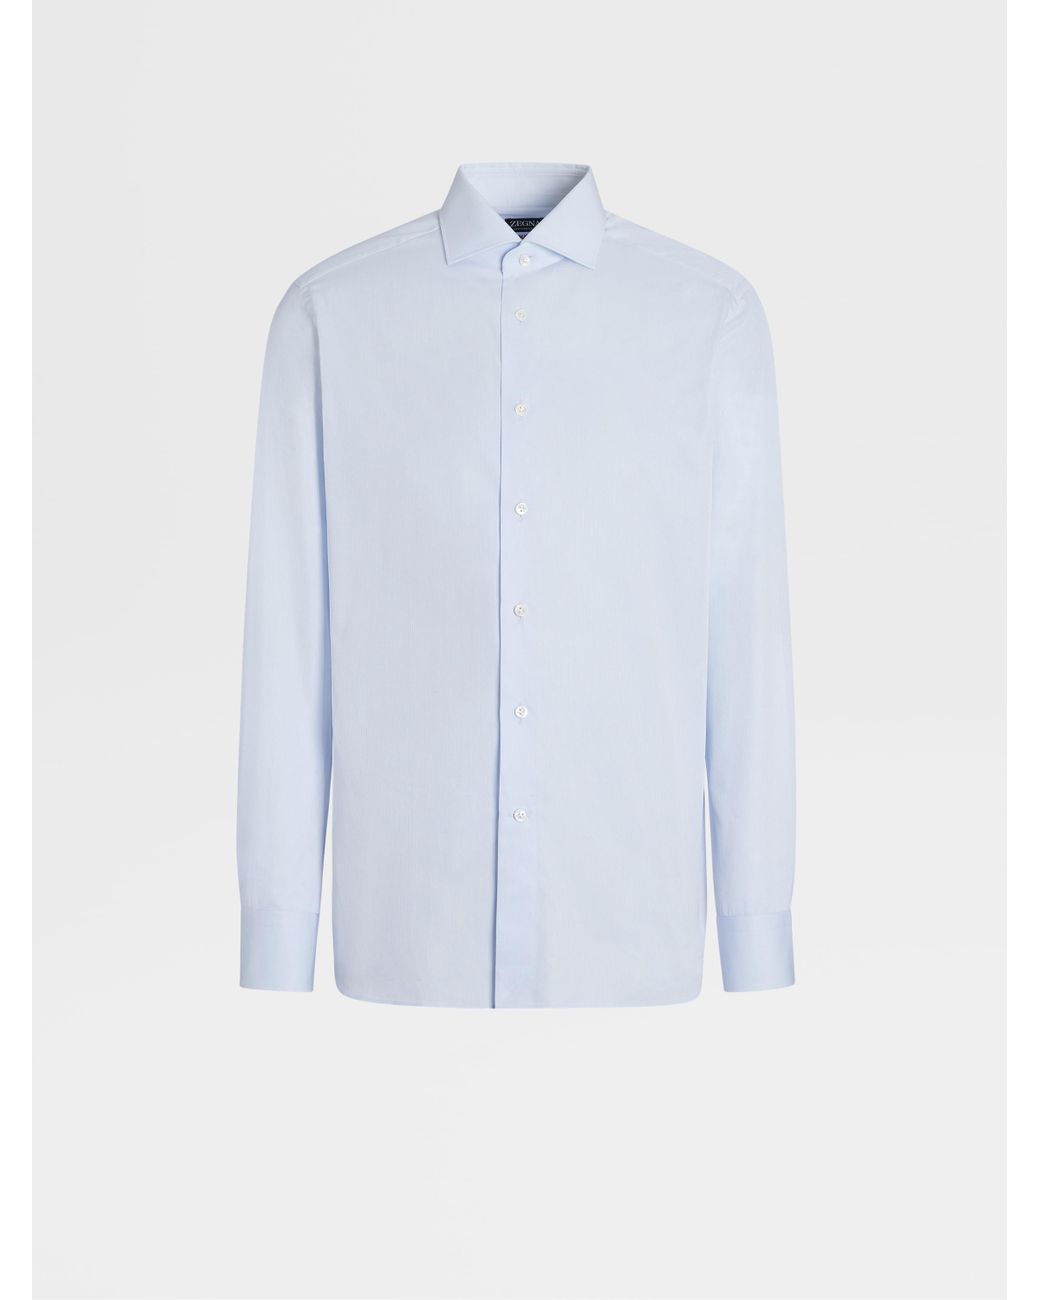 Zegna Centoventimila Cotton Micro-striped Shirt in Blue for Men | Lyst UK